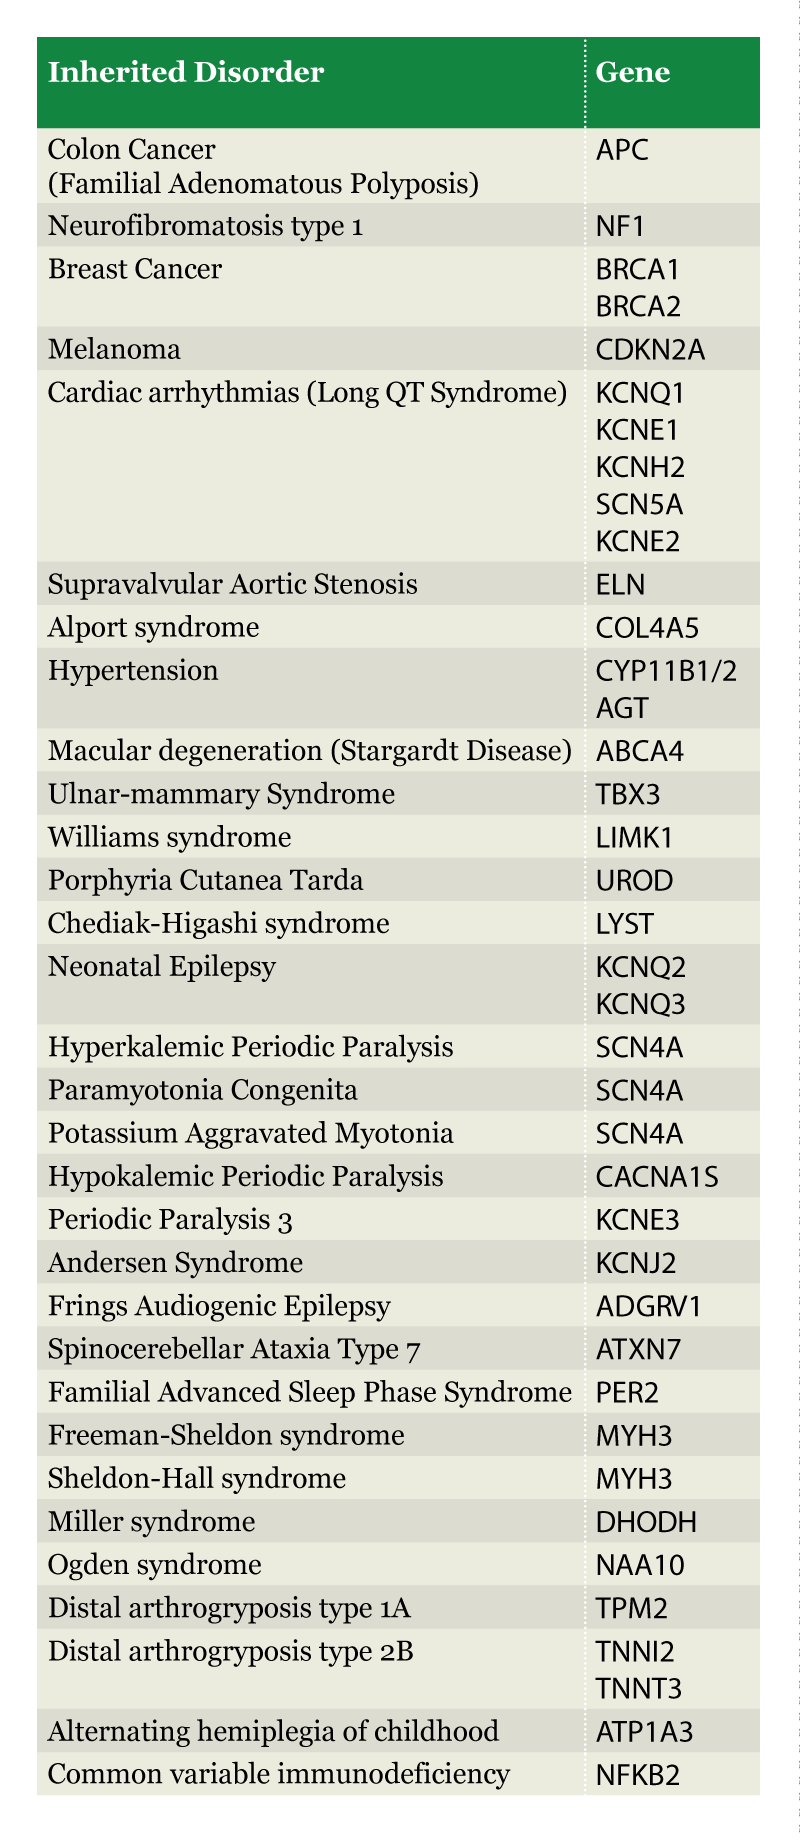 Inherited Disorder Table